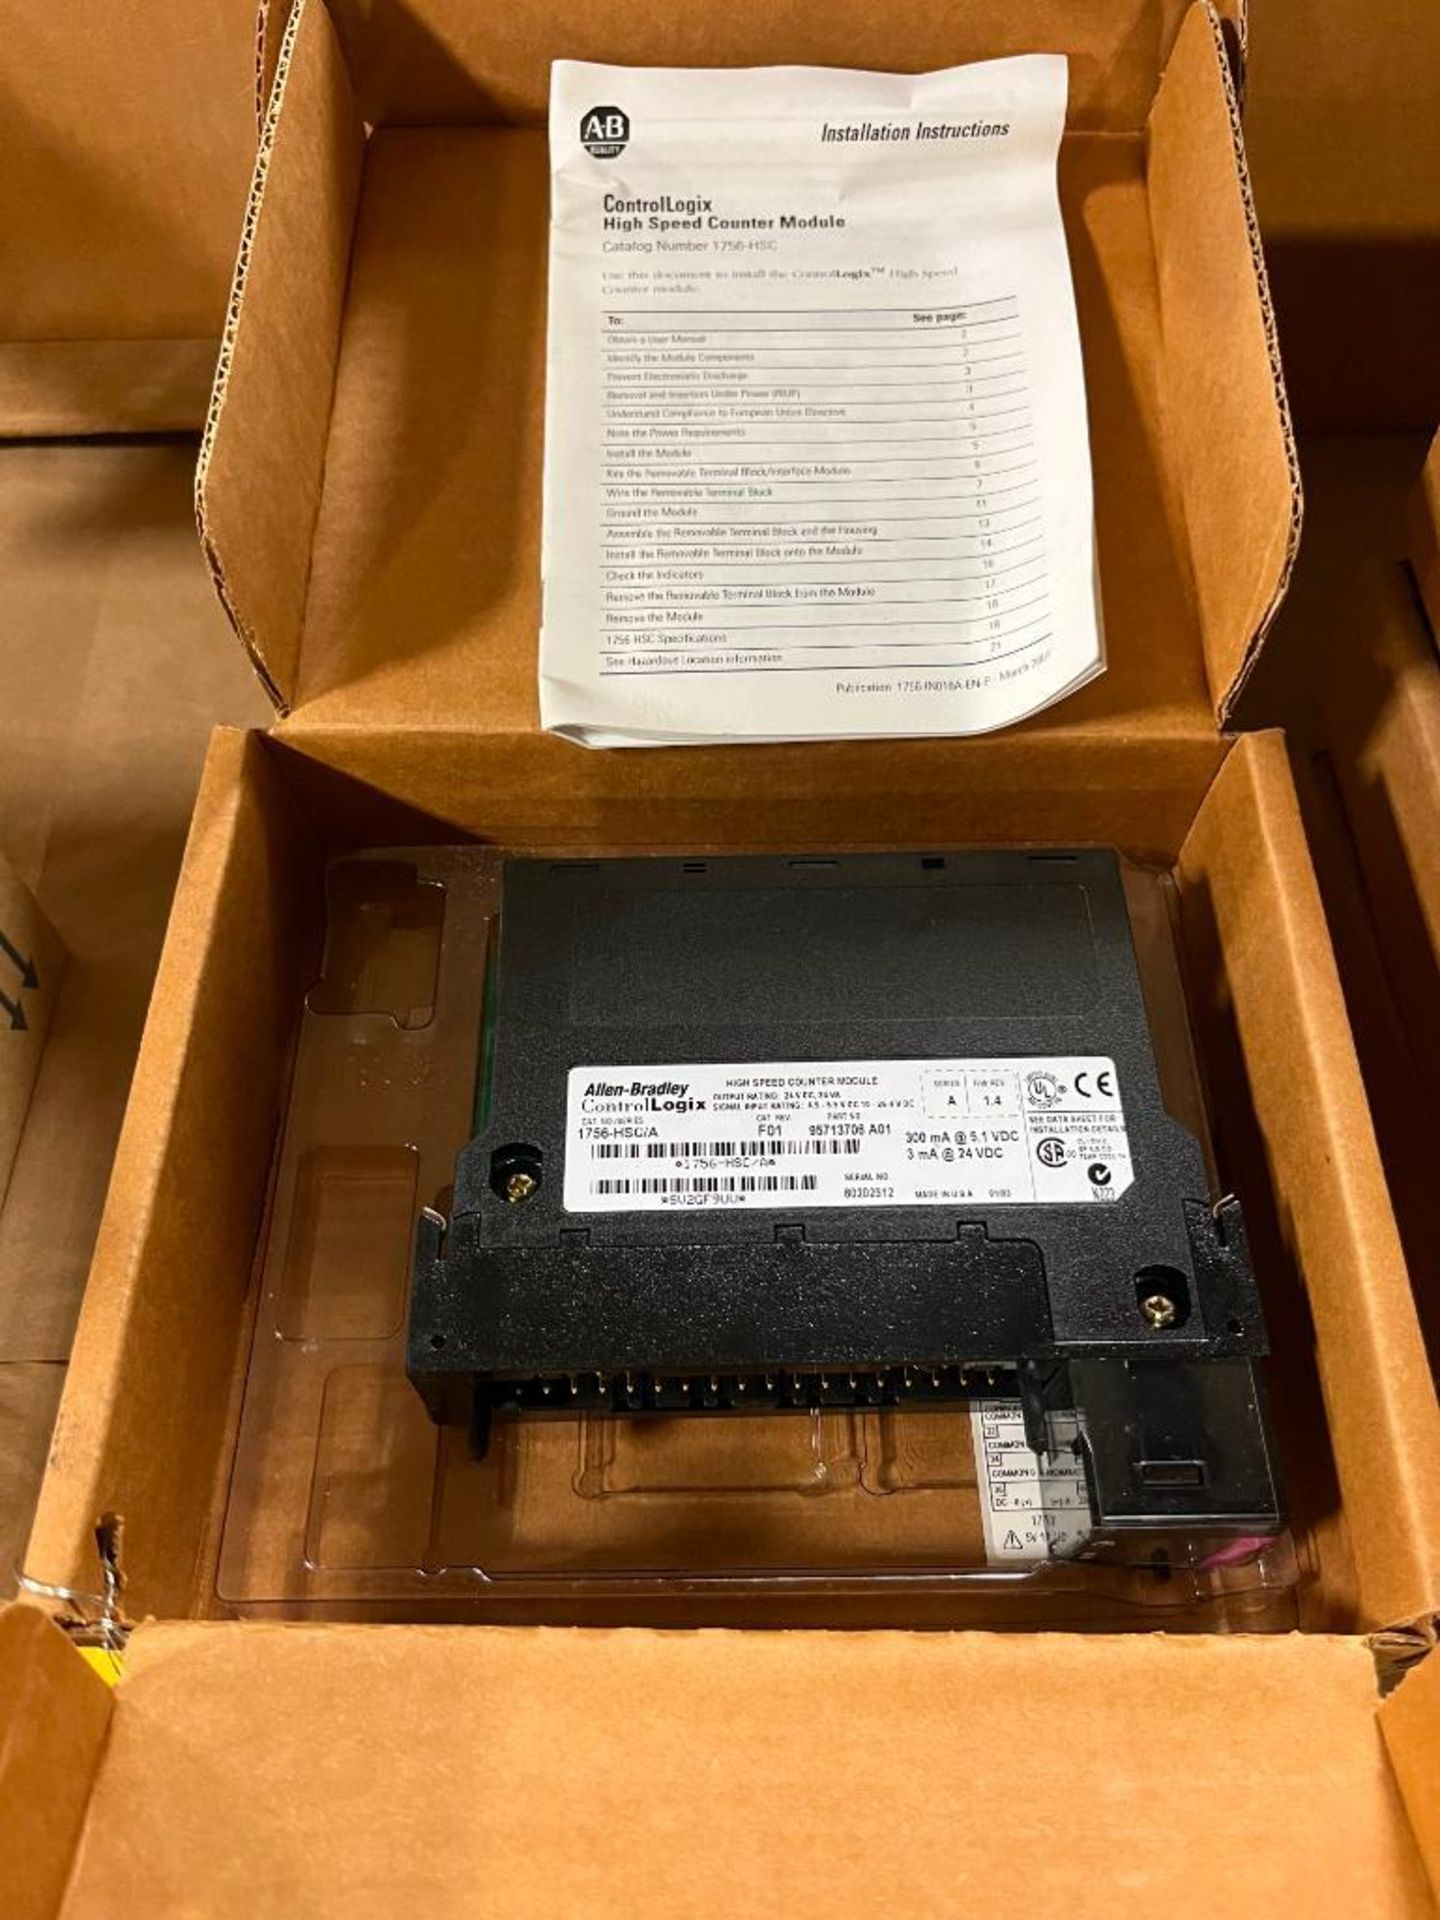 (1) Allen-Bradley ContolLogix High Speed Counter Module, Catalog Number 1756-HSC, Series A, (1) Alle - Image 5 of 6